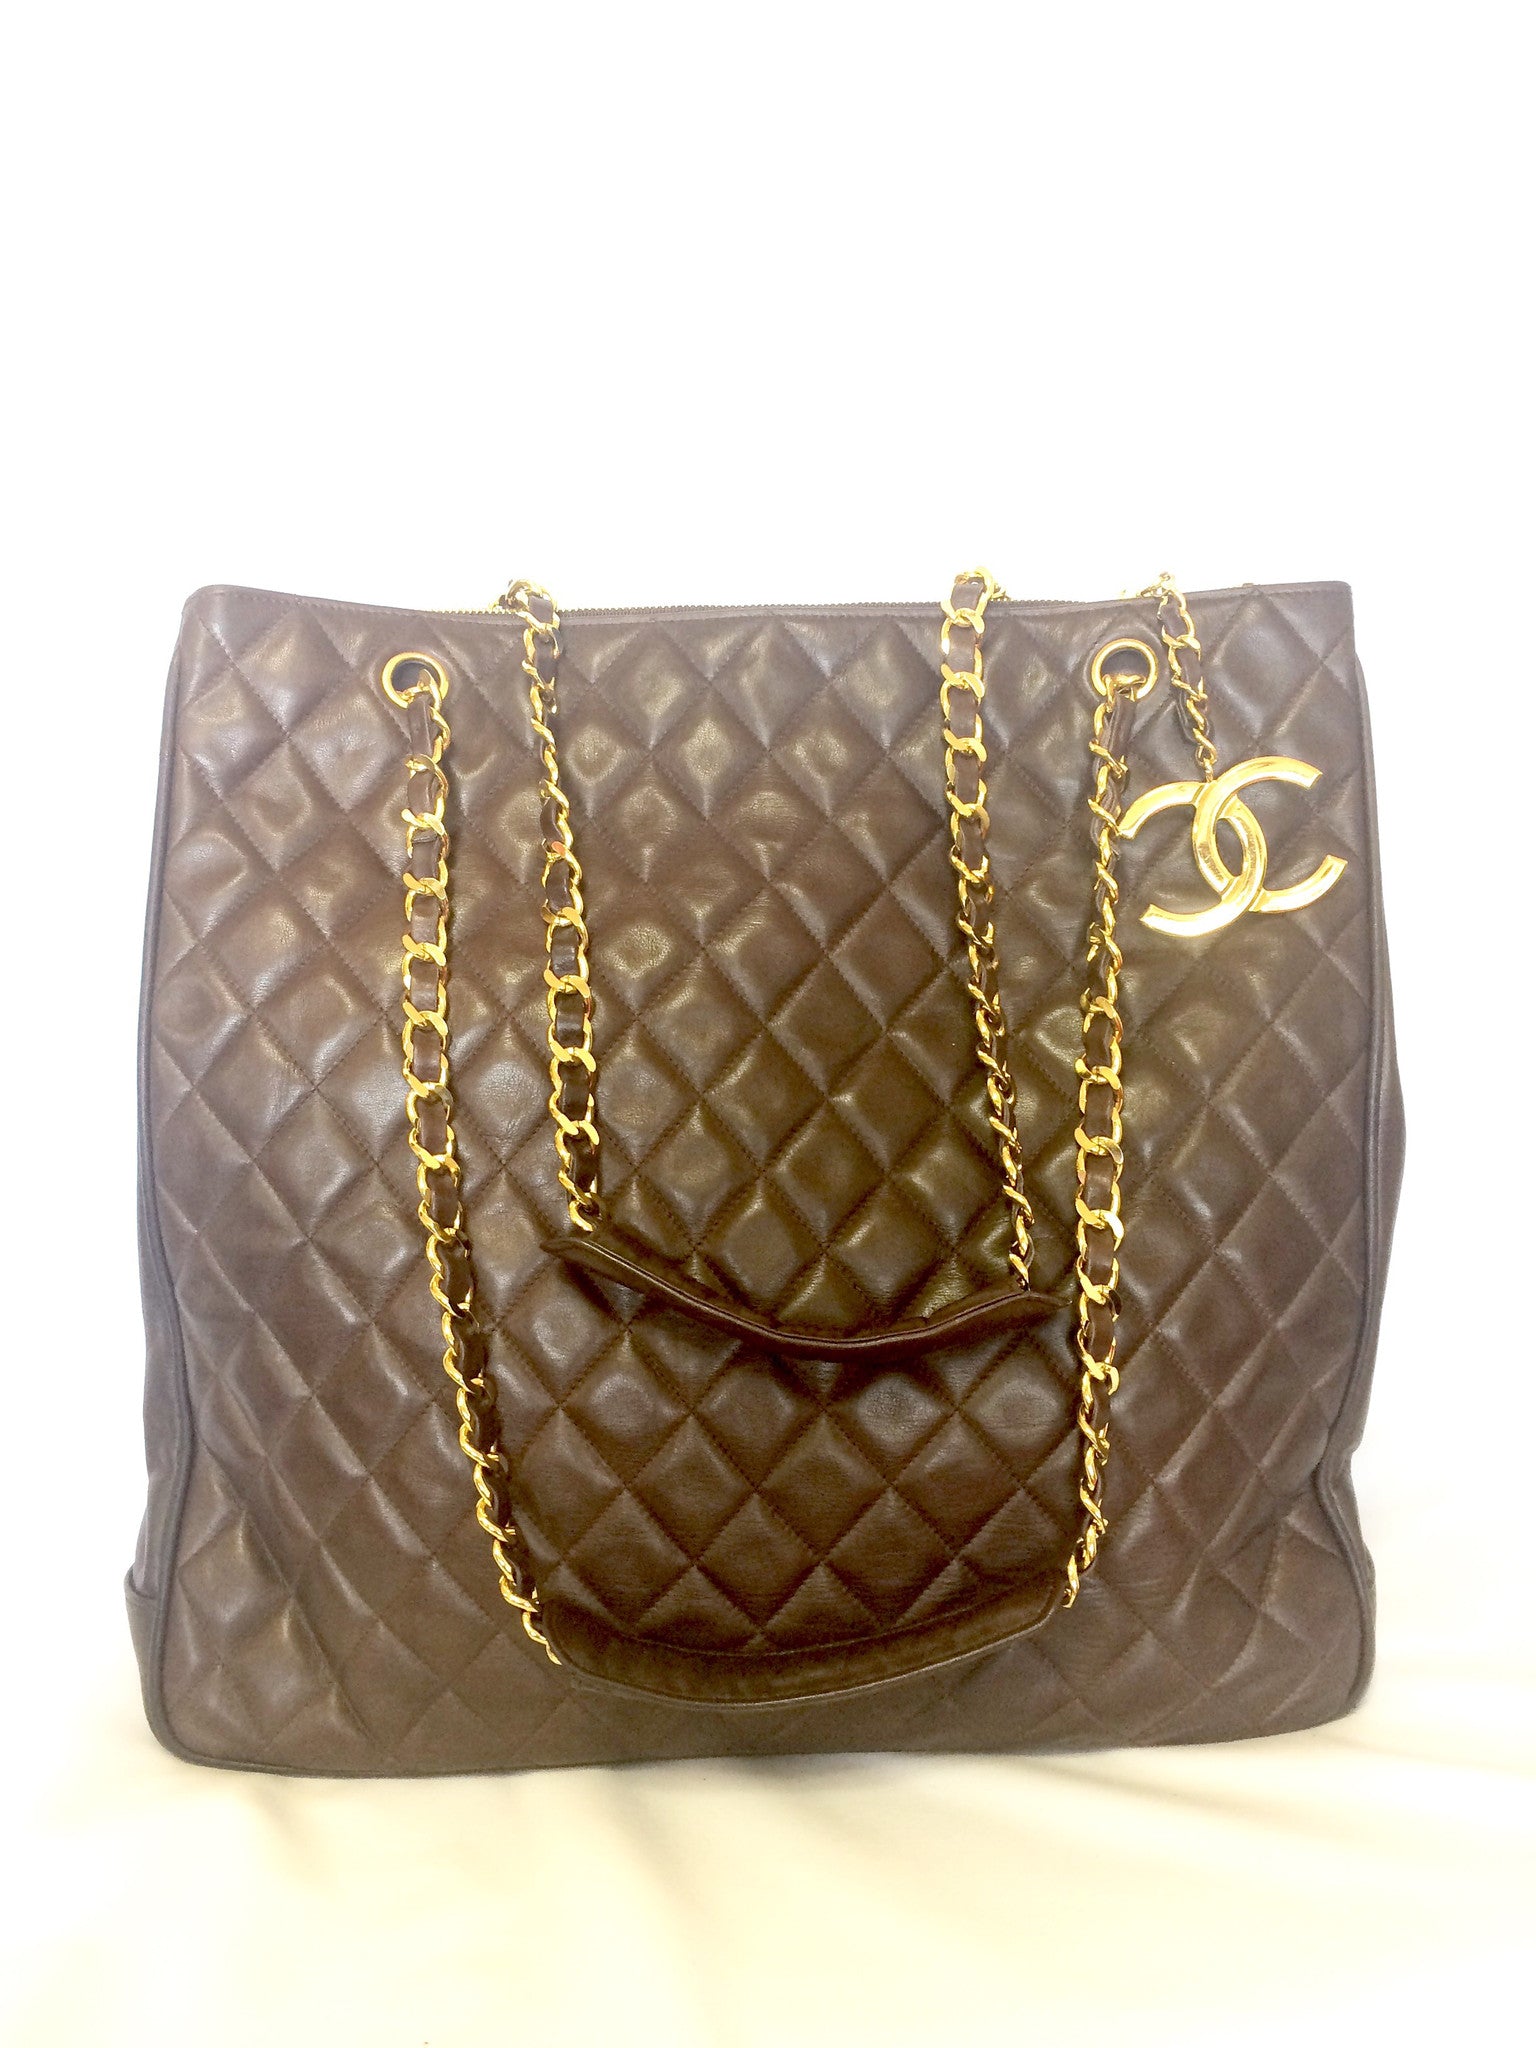 chanel large deauville tote bag